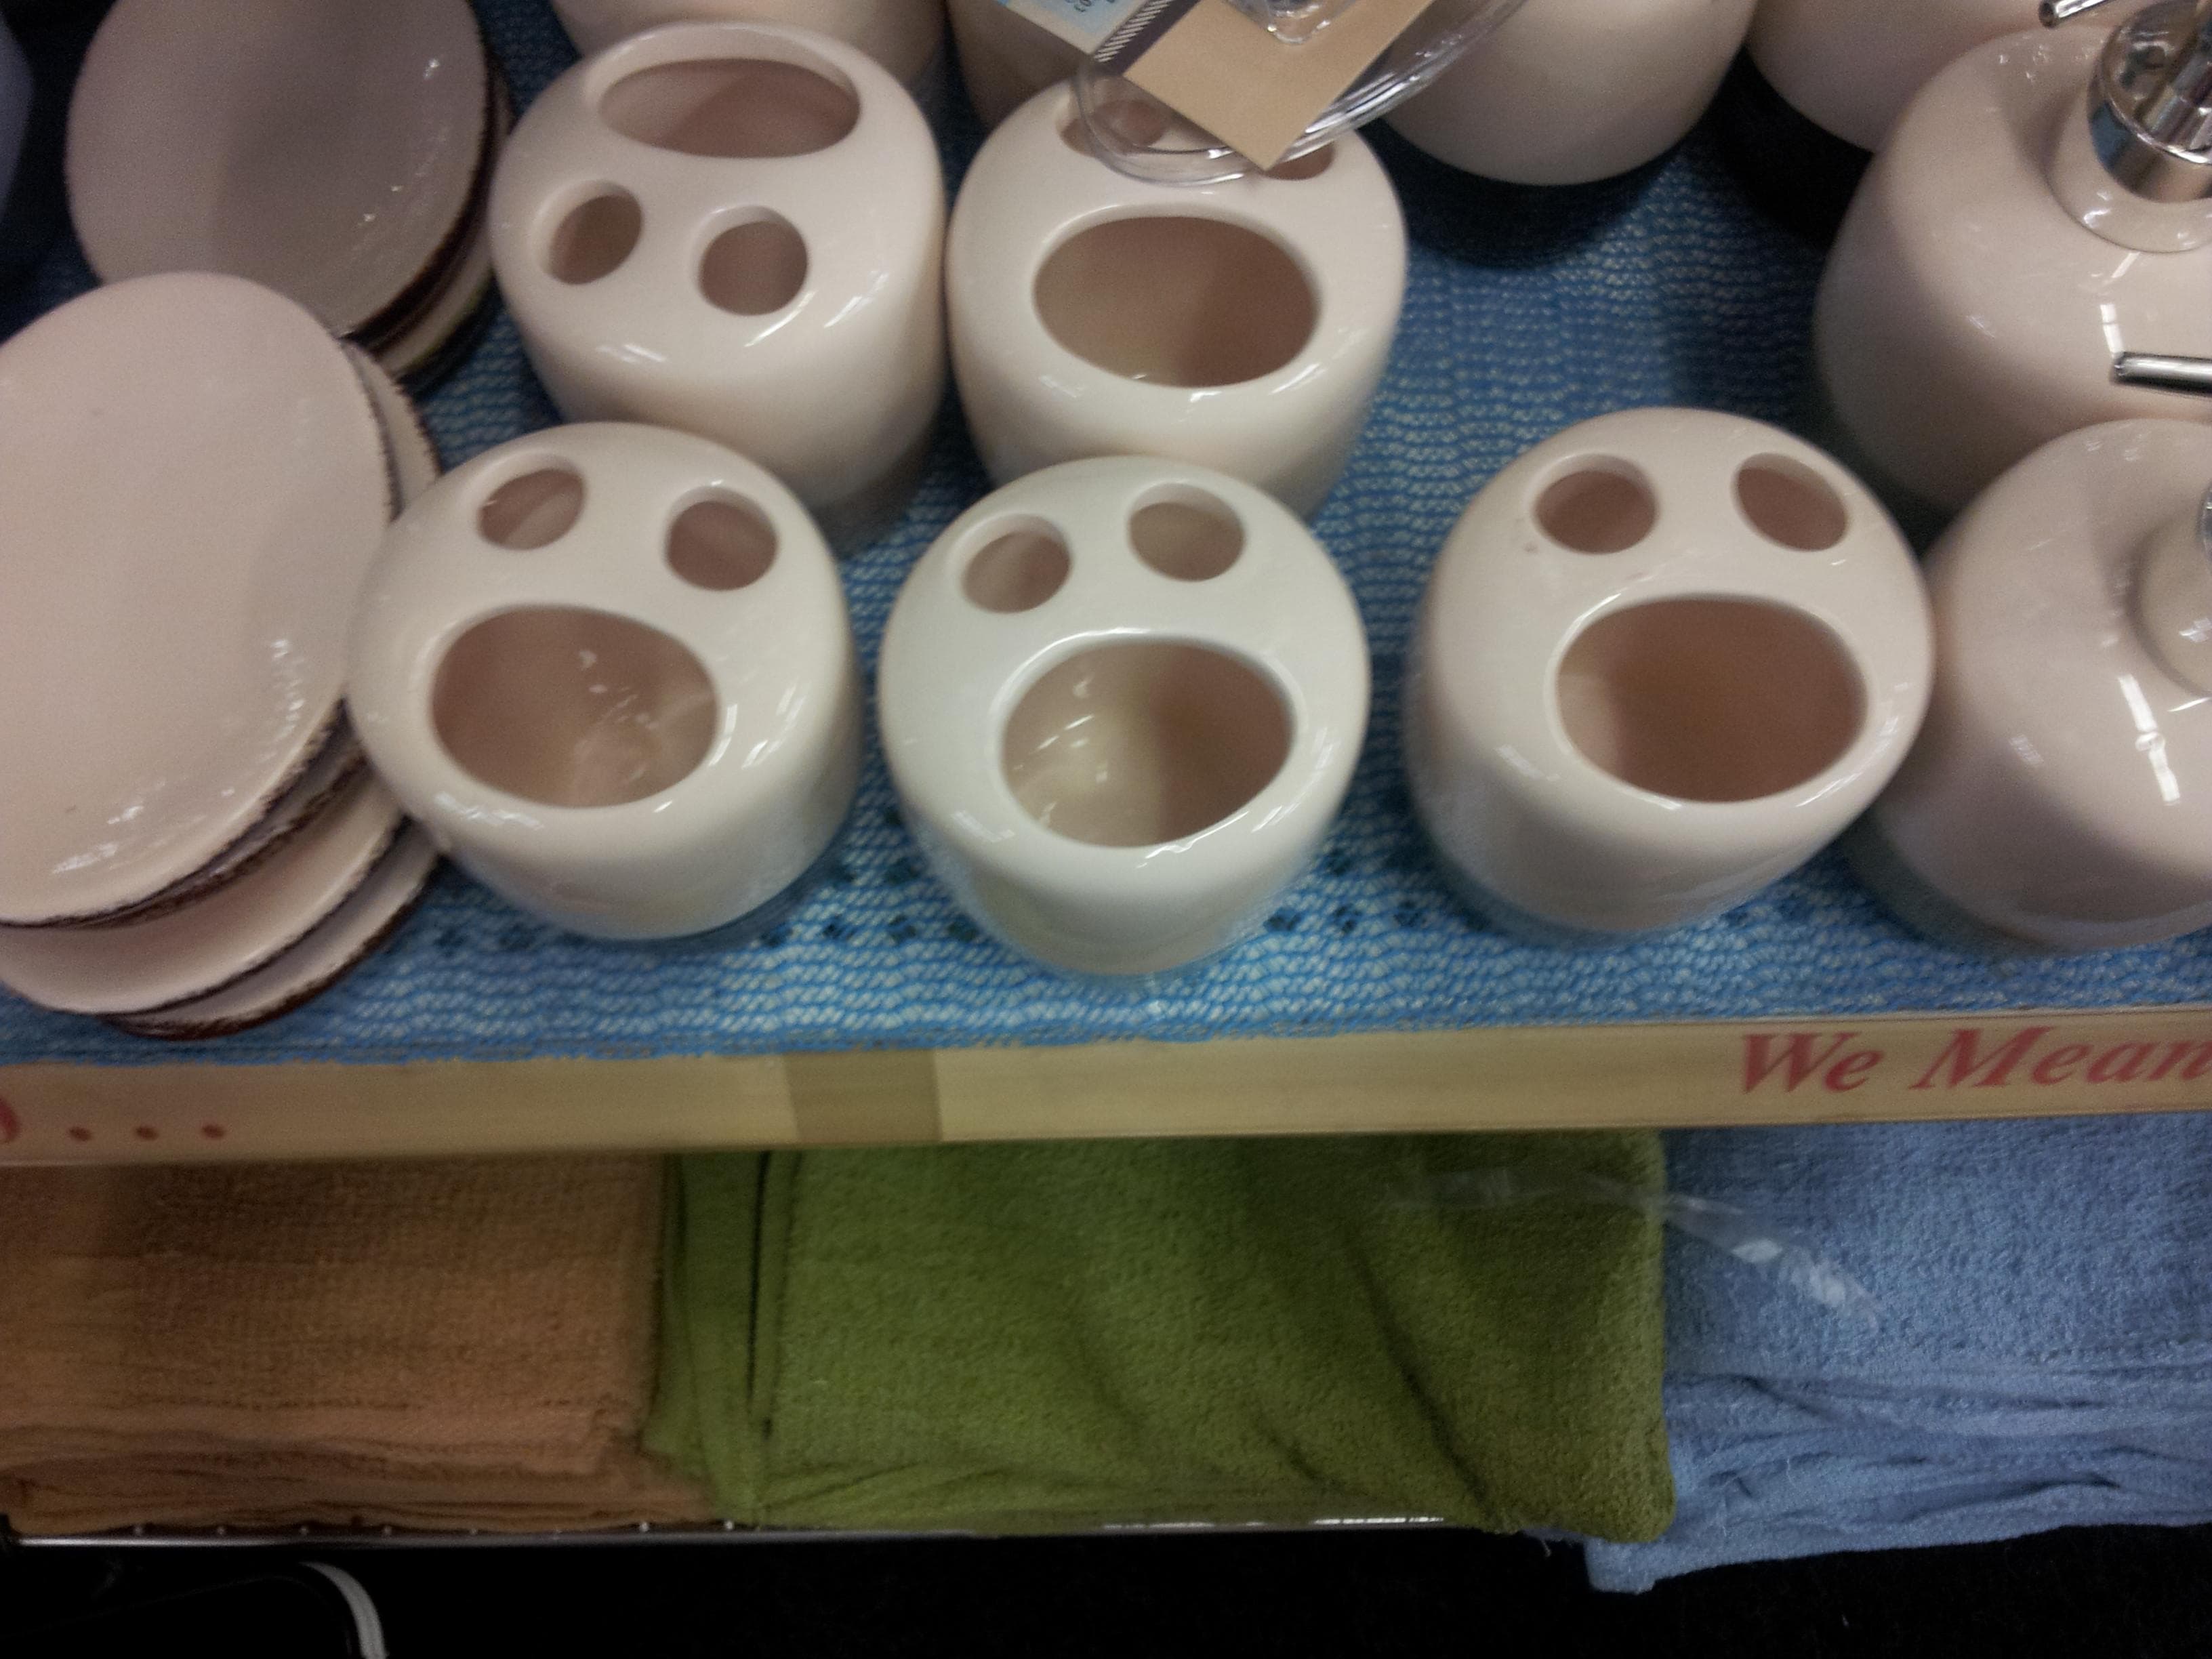 These Toothbrush Holders on Random Inanimate Objects Who Look Terrified